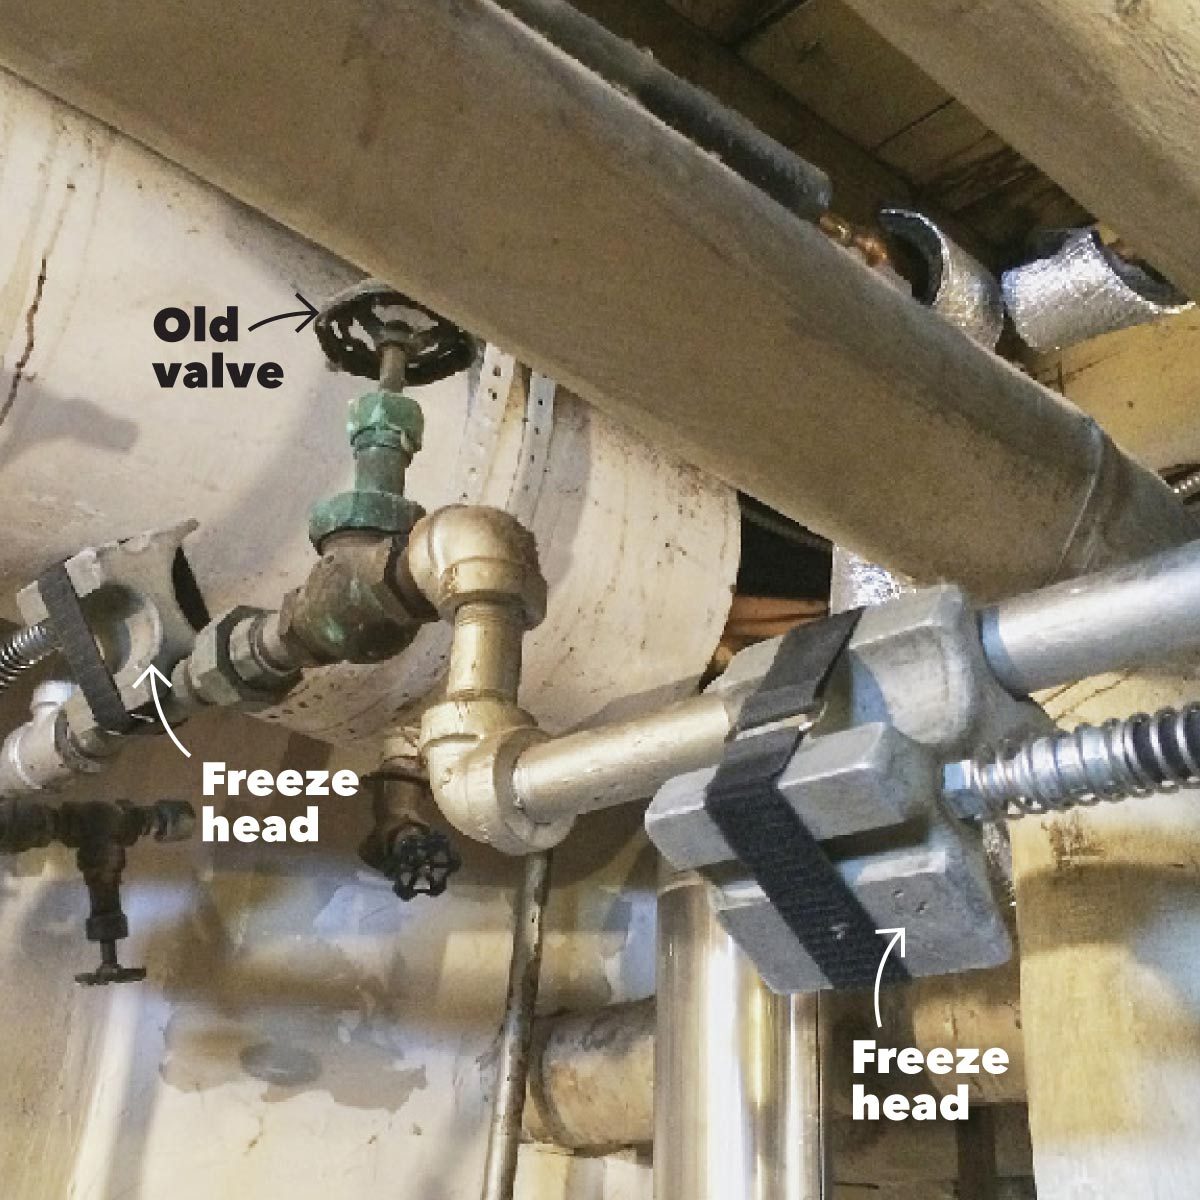 Why You Should Freeze Pipes on Purpose